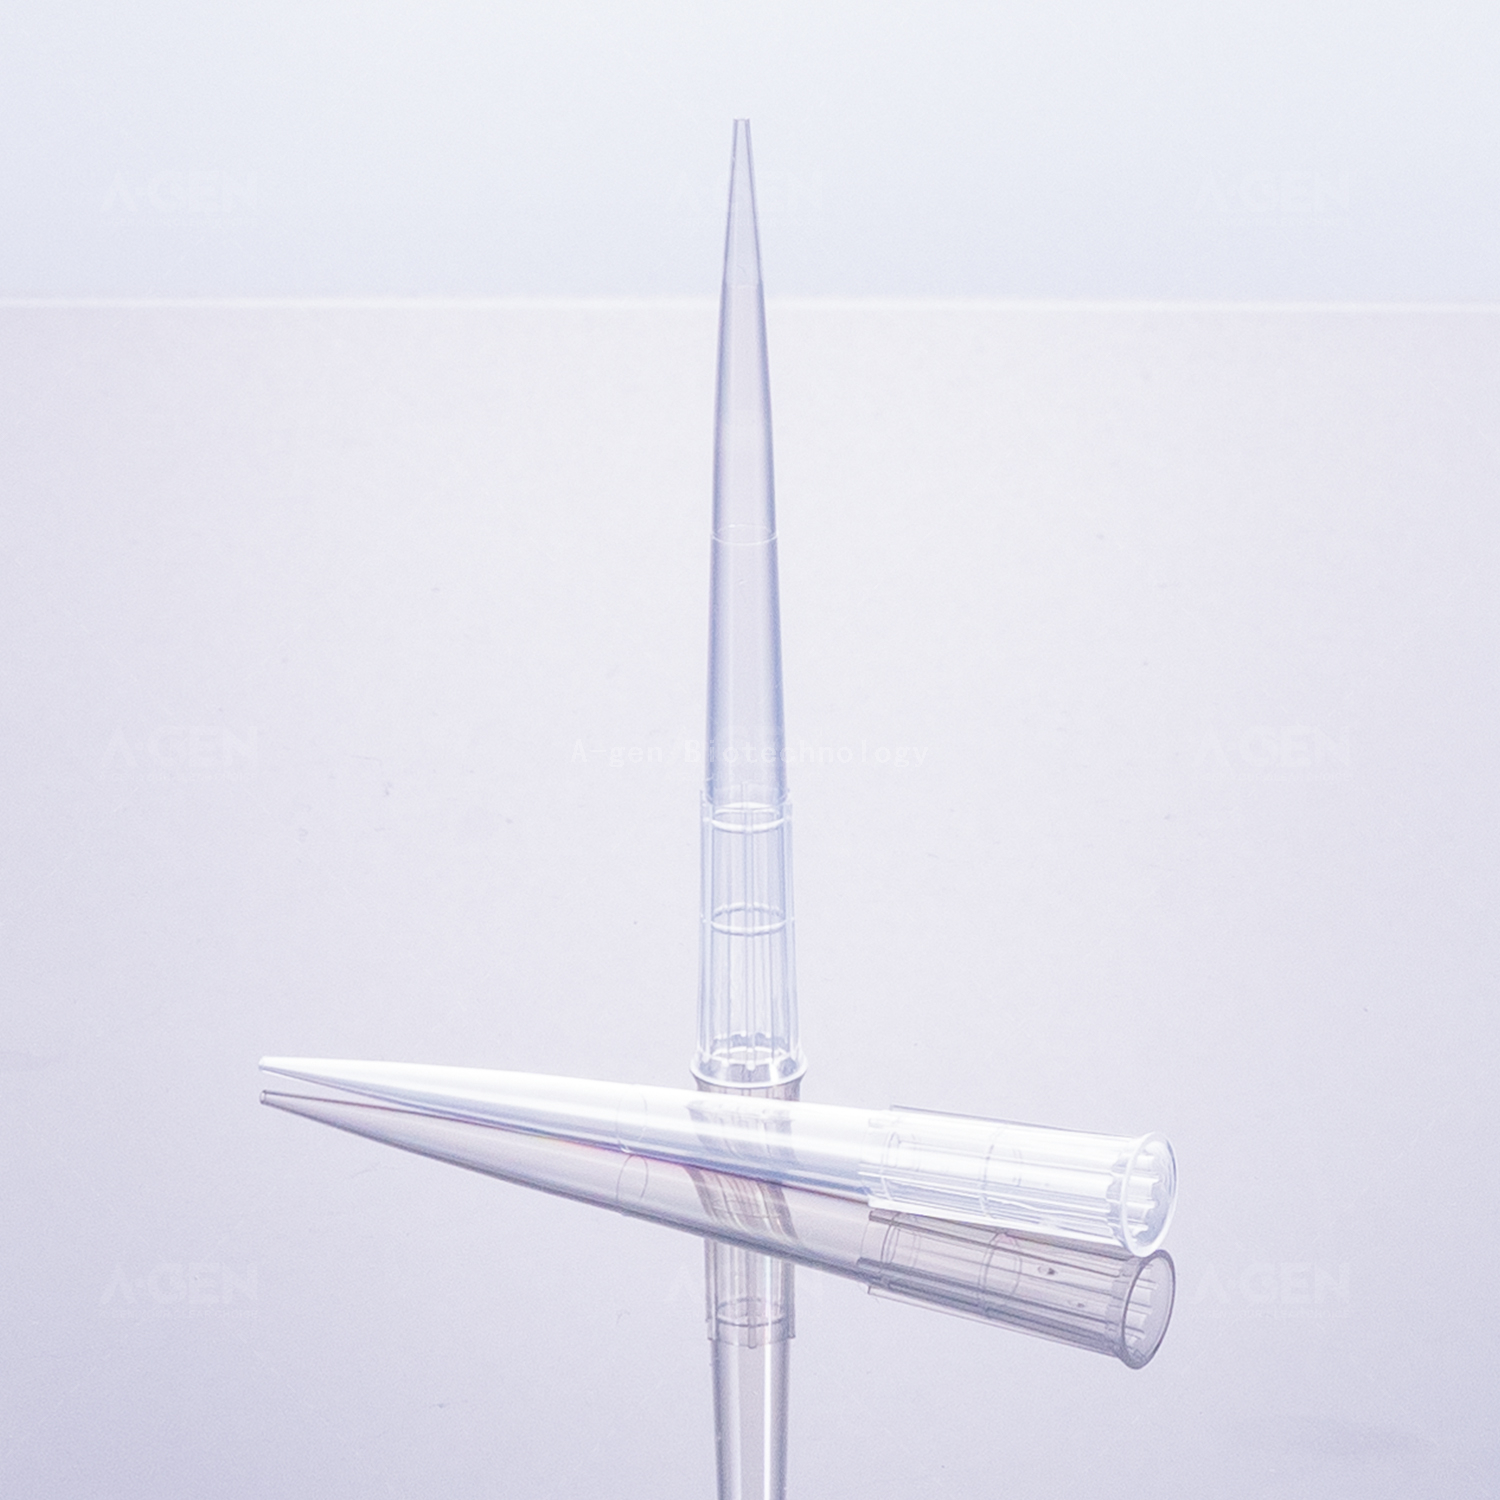 Opentrons Pipette Tip Clear 200μL PP Pipette Tip (Racked,sterile) for Liquid Transfer Without Filter OPT-200-RSL Low Retention Is Optional